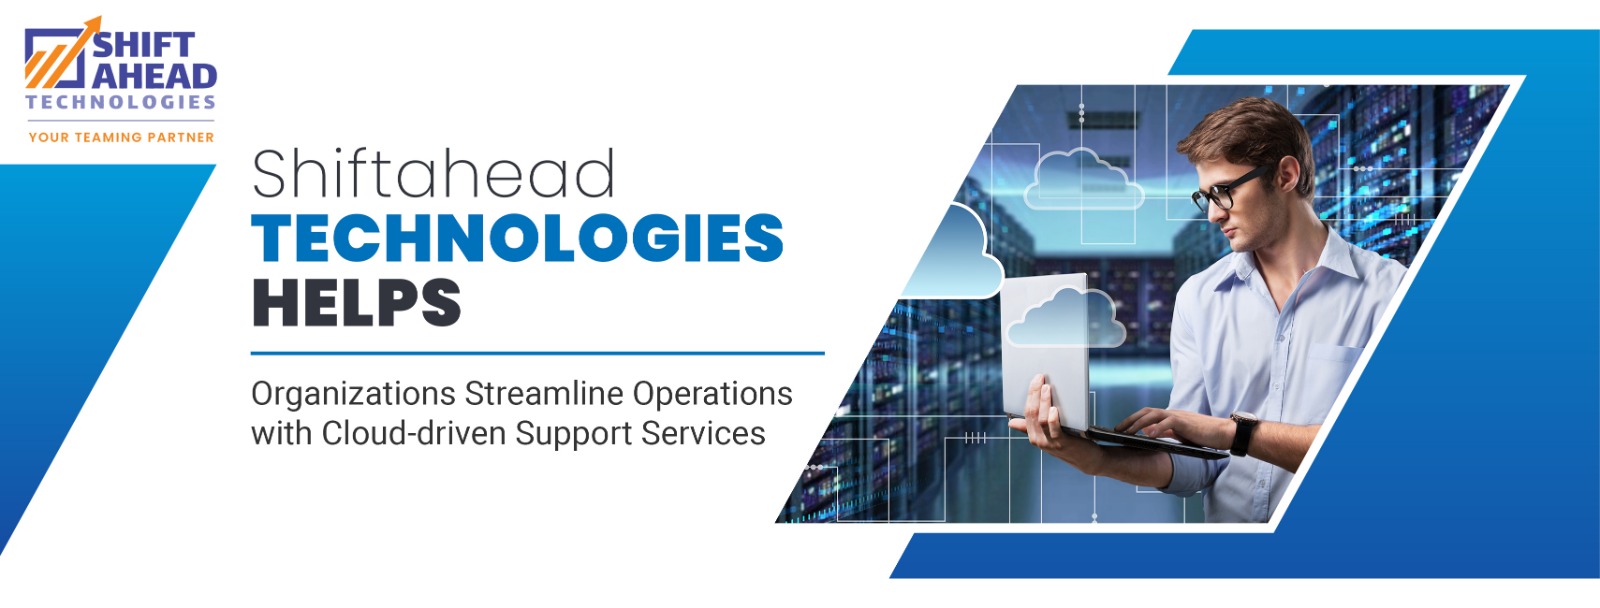 Shiftahead Technologies Helps Organizations Streamline Operations with Cloud-driven Support Services